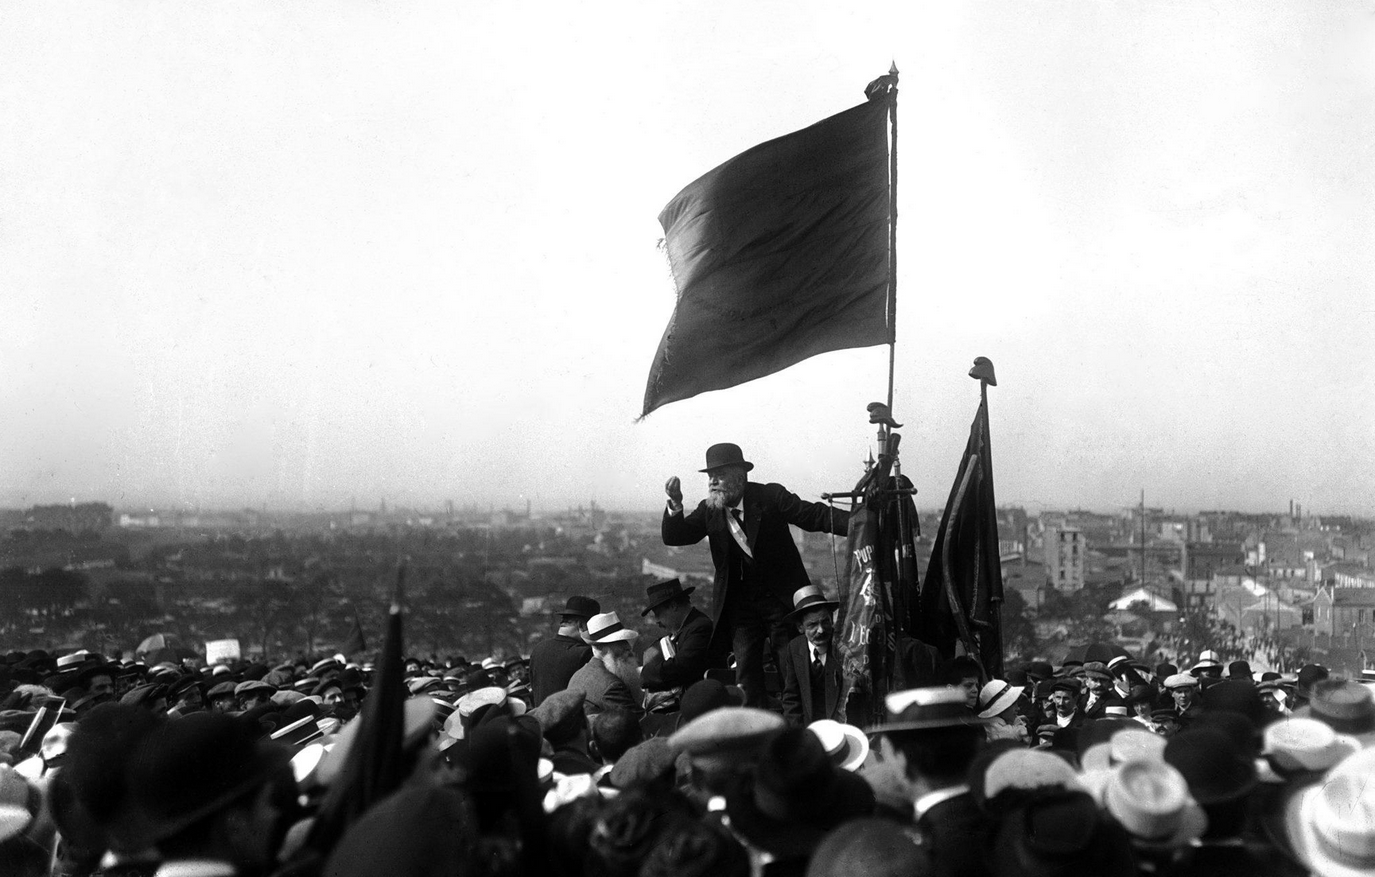 Image of Jean Jaurès speaking at a rally.